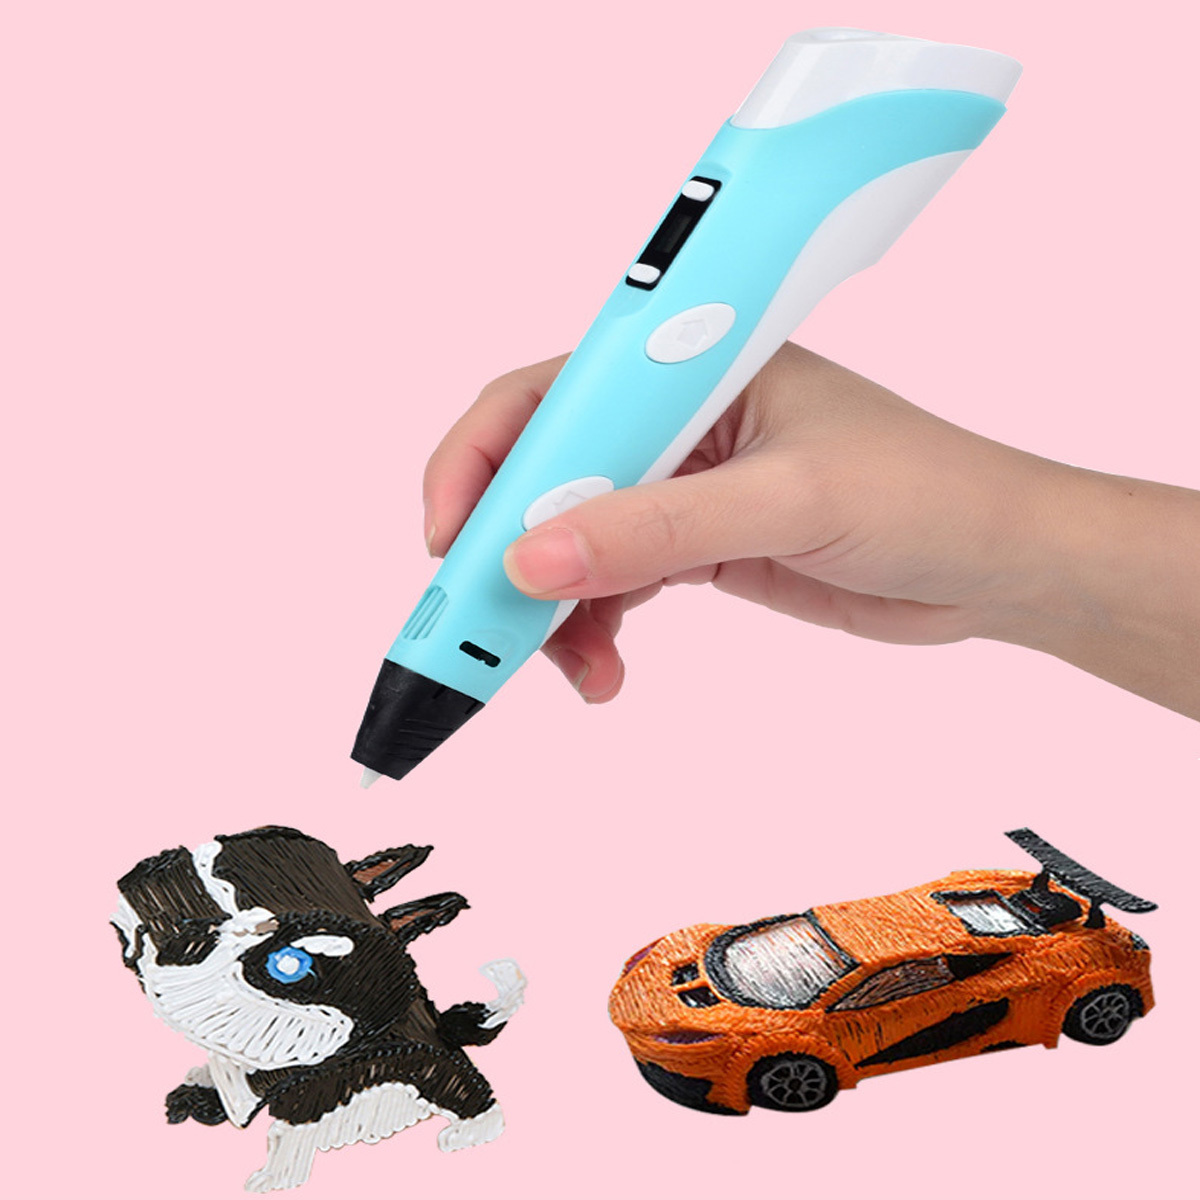  20pcs 3D Printing Pen Drawing Templates Includes 40 Different  Cartoon Designs, 3D Drawing Mold Drawing Books for 3D Printing Pen for  Children Gift Toy : Industrial & Scientific